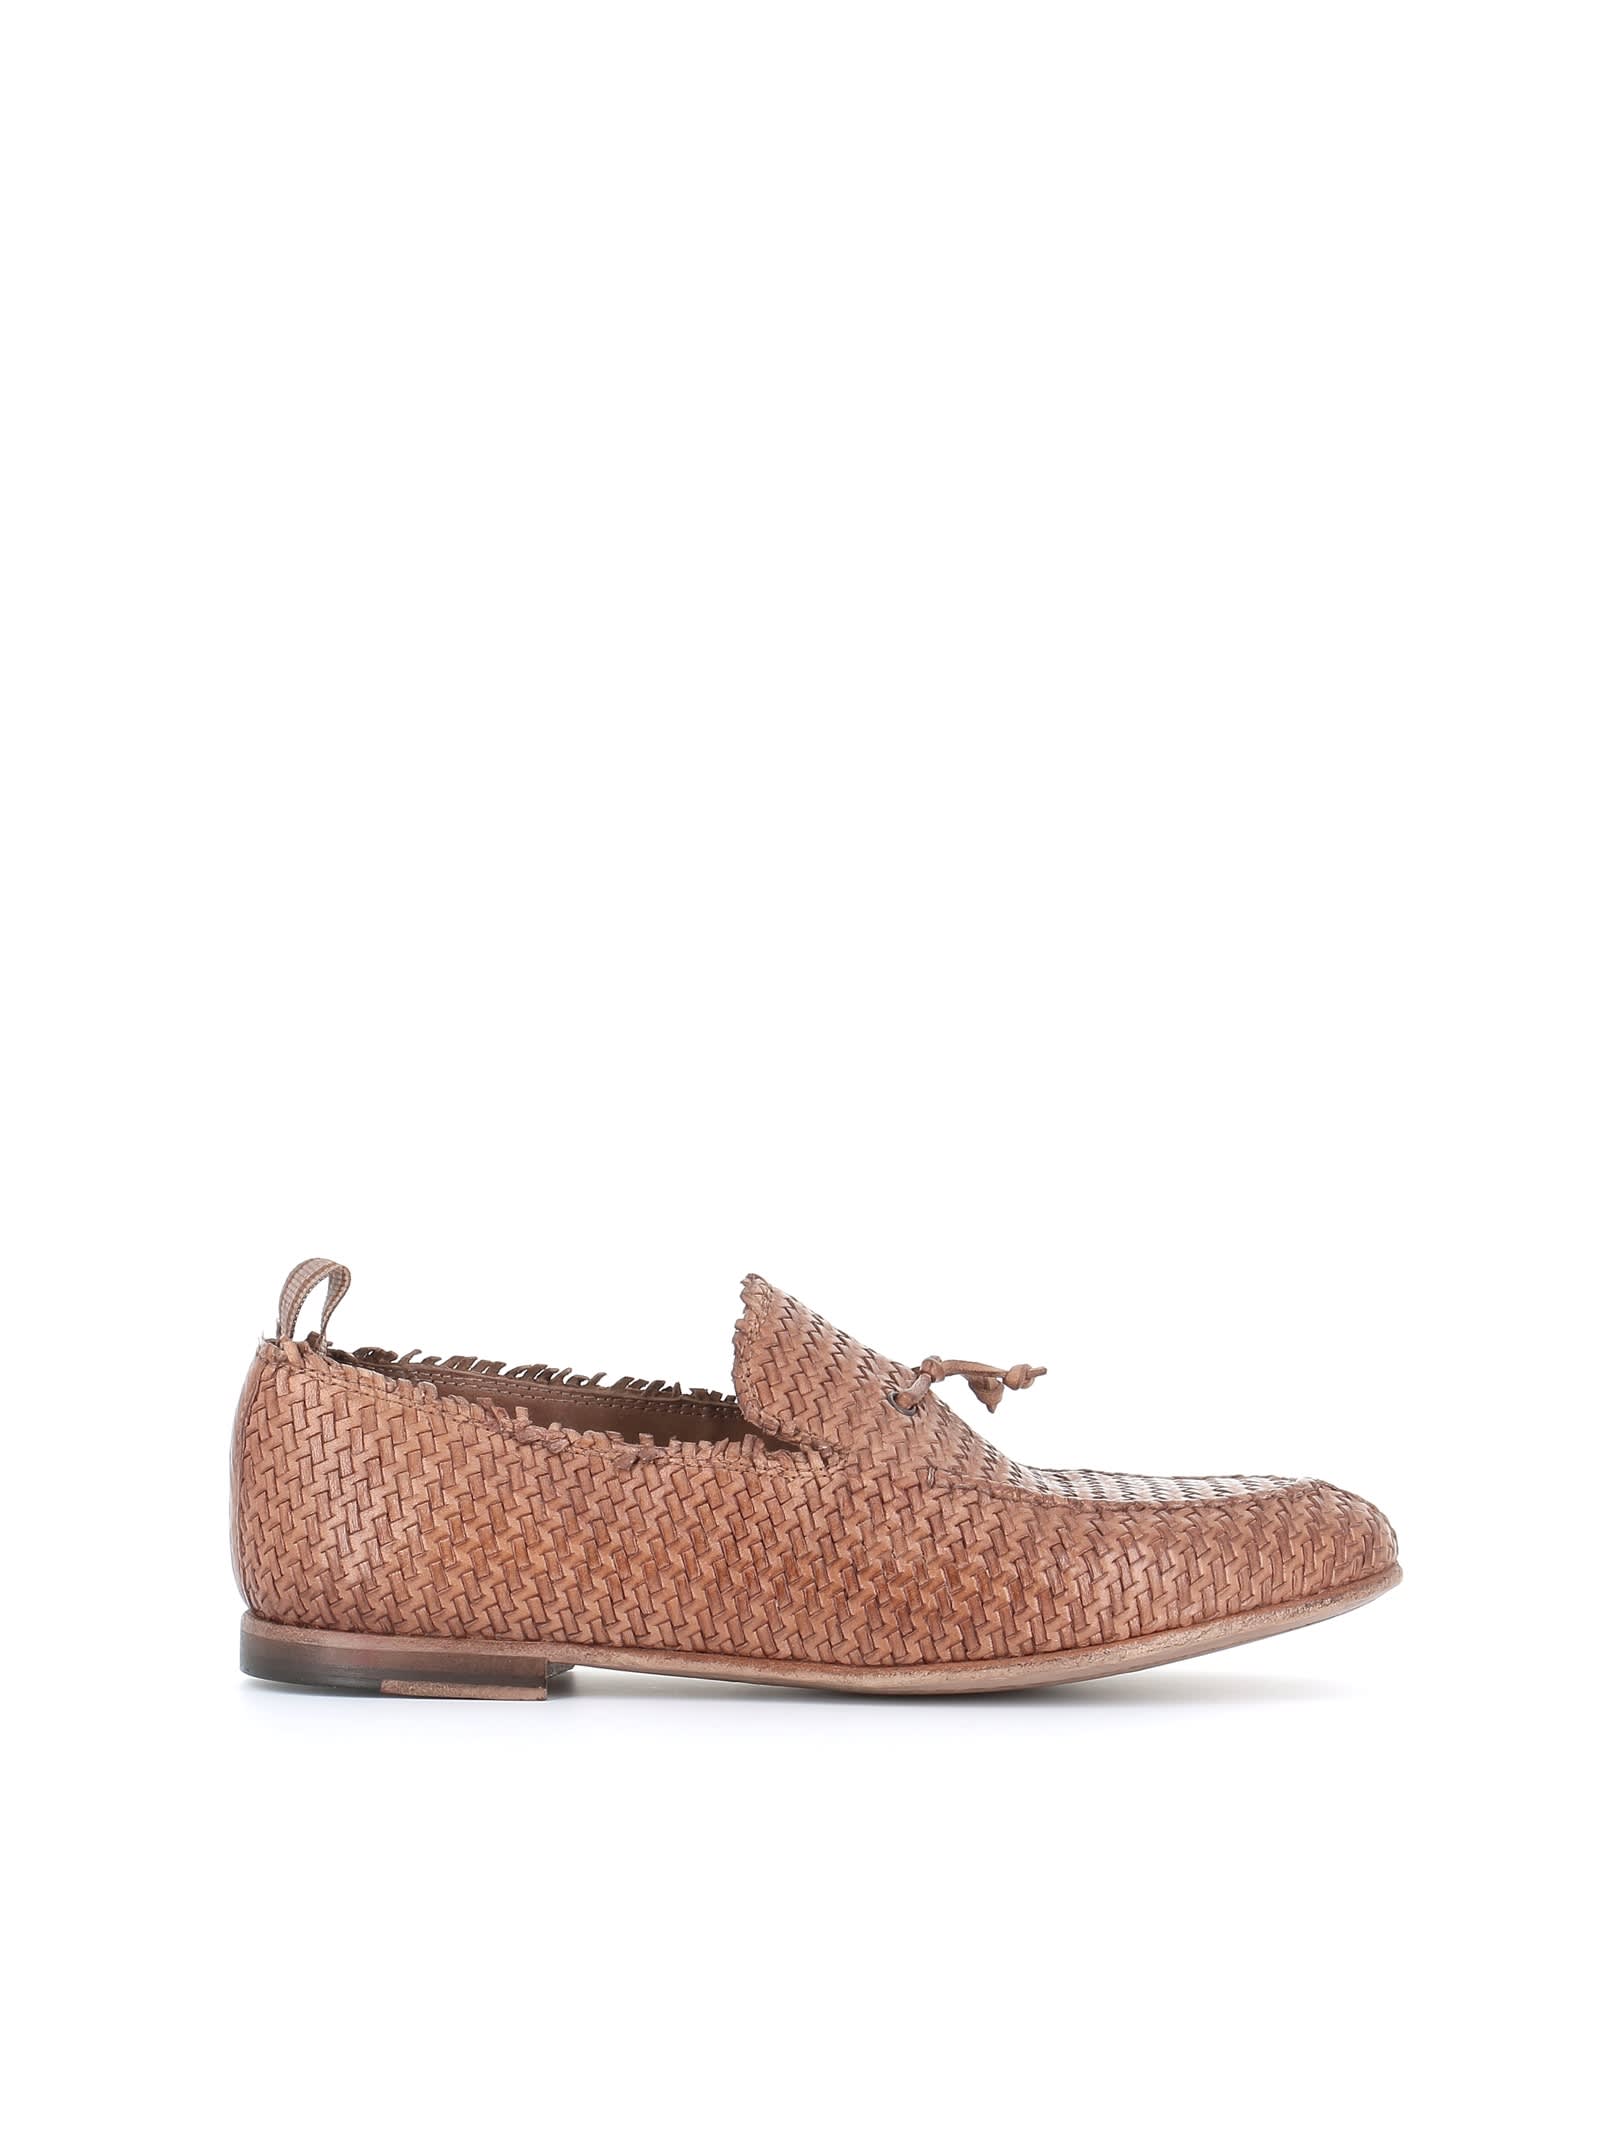 Alexander Hotto Loafer 57611 Candy In Brown/camel